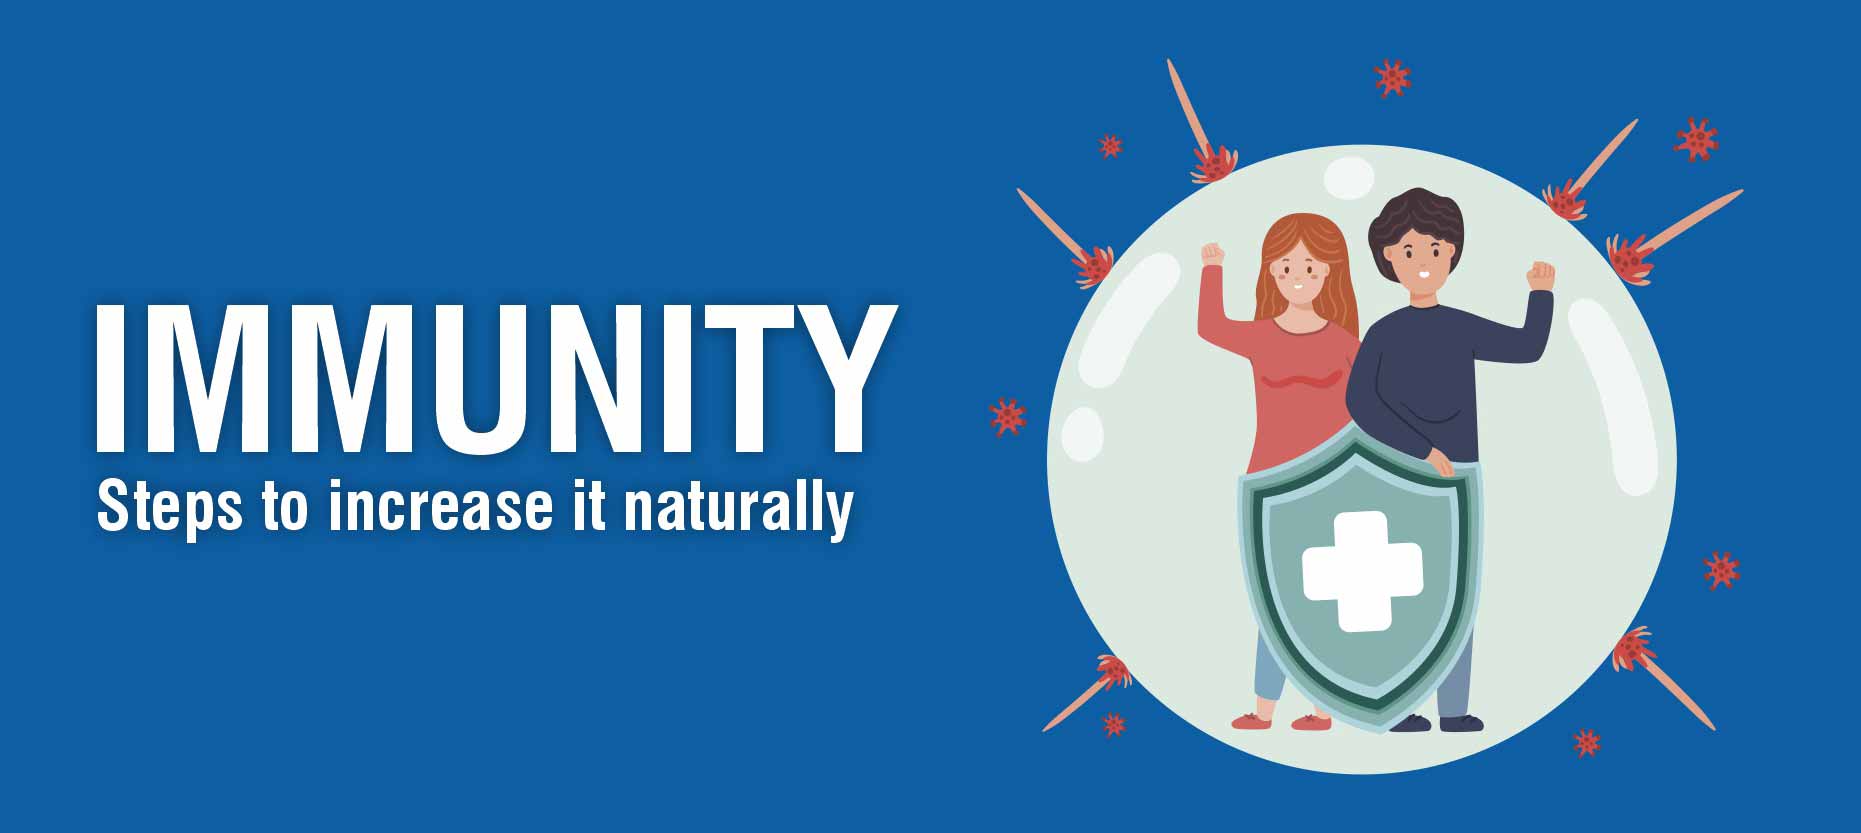 Immunity: Steps to increase it naturally